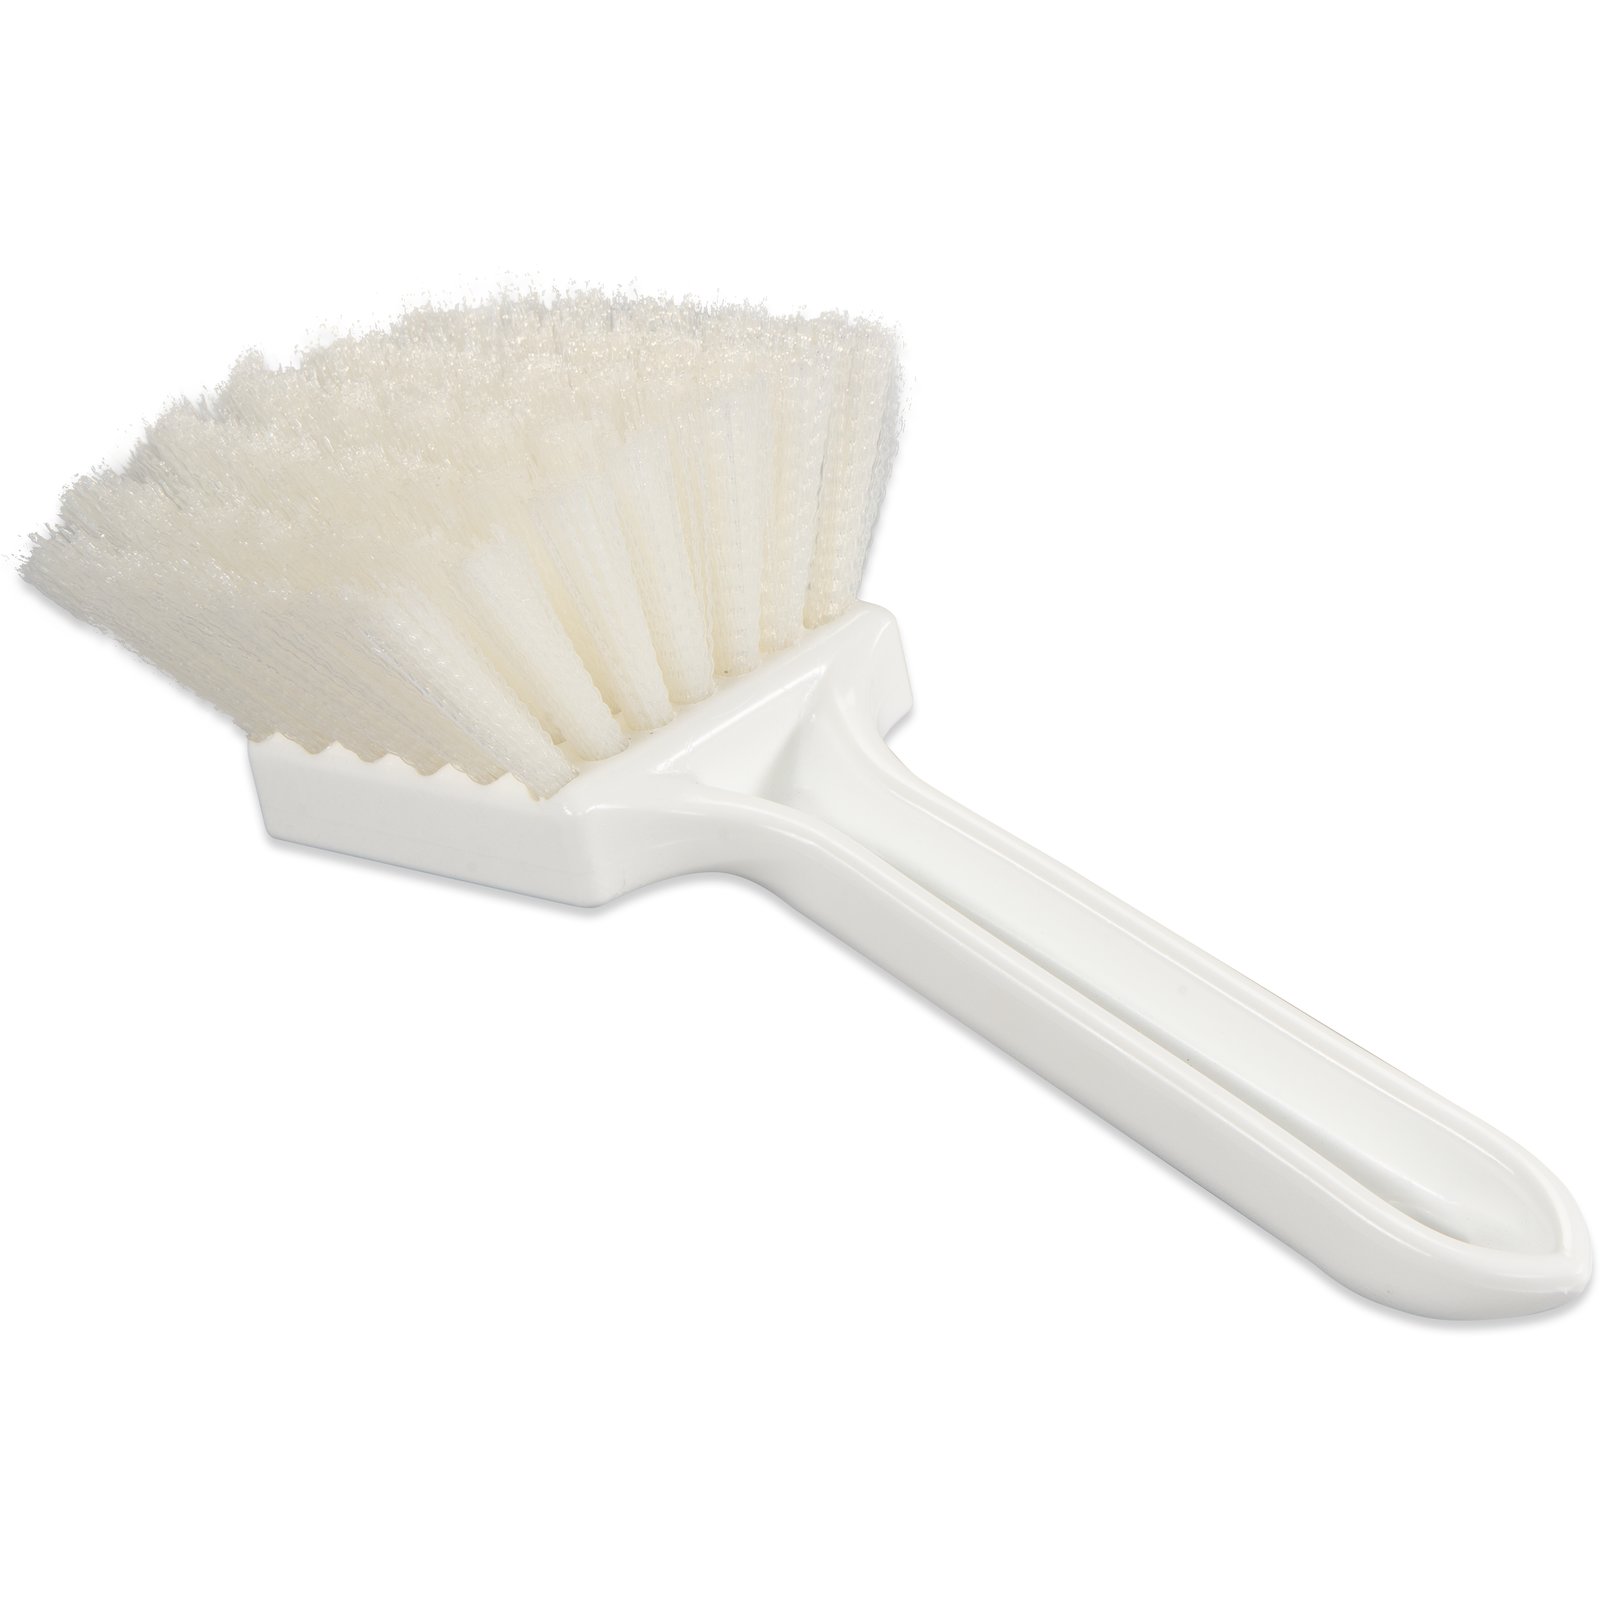 Curved Polypropylene Handle Utility Cleaning Toothbrush